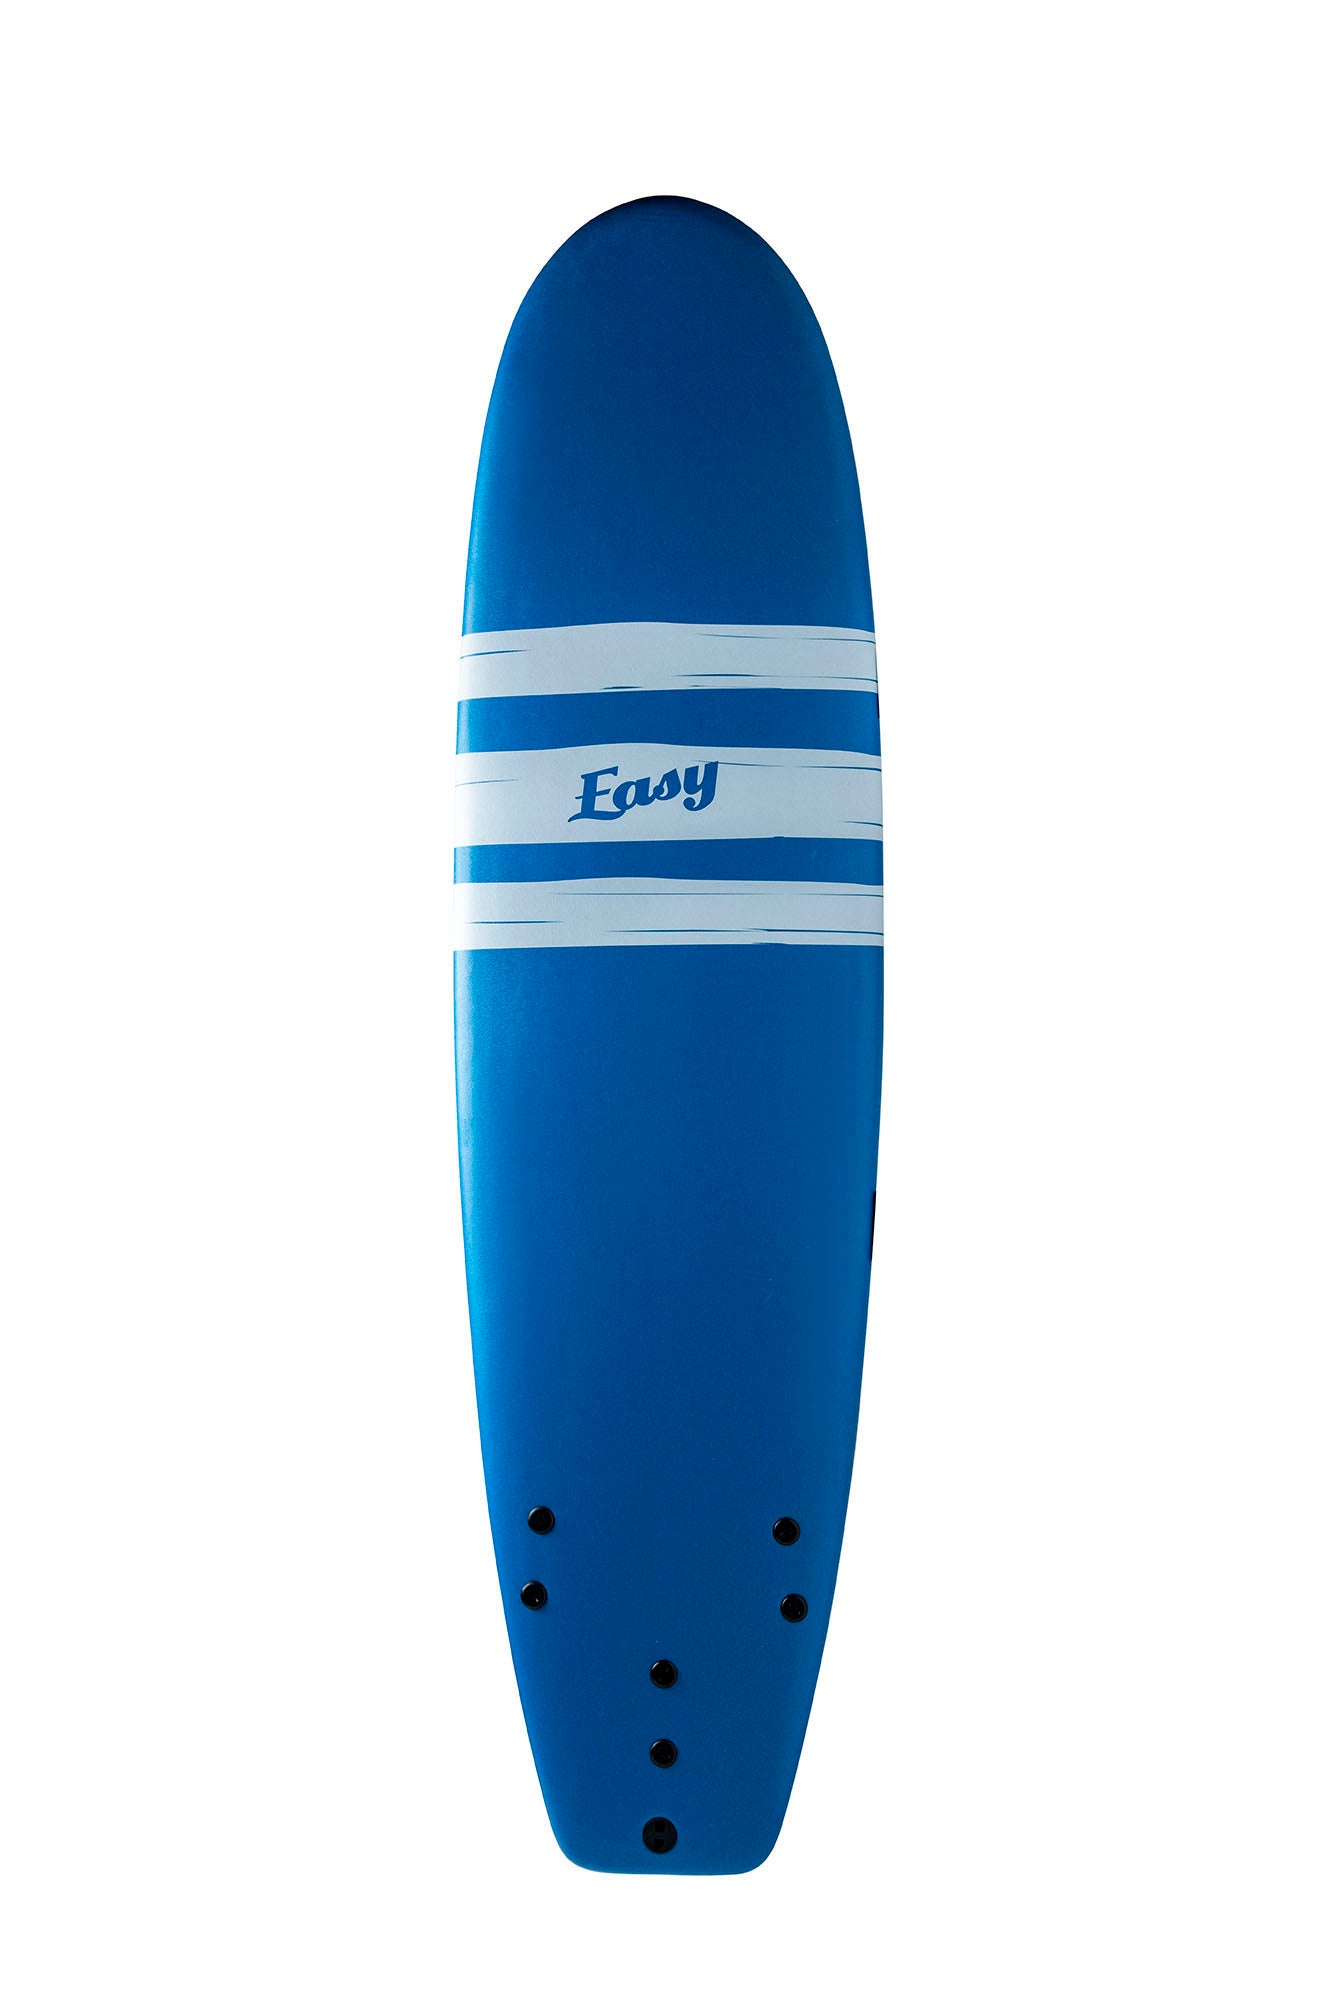 Easy 7ft 6 Soft Top Surfboard - Boards360